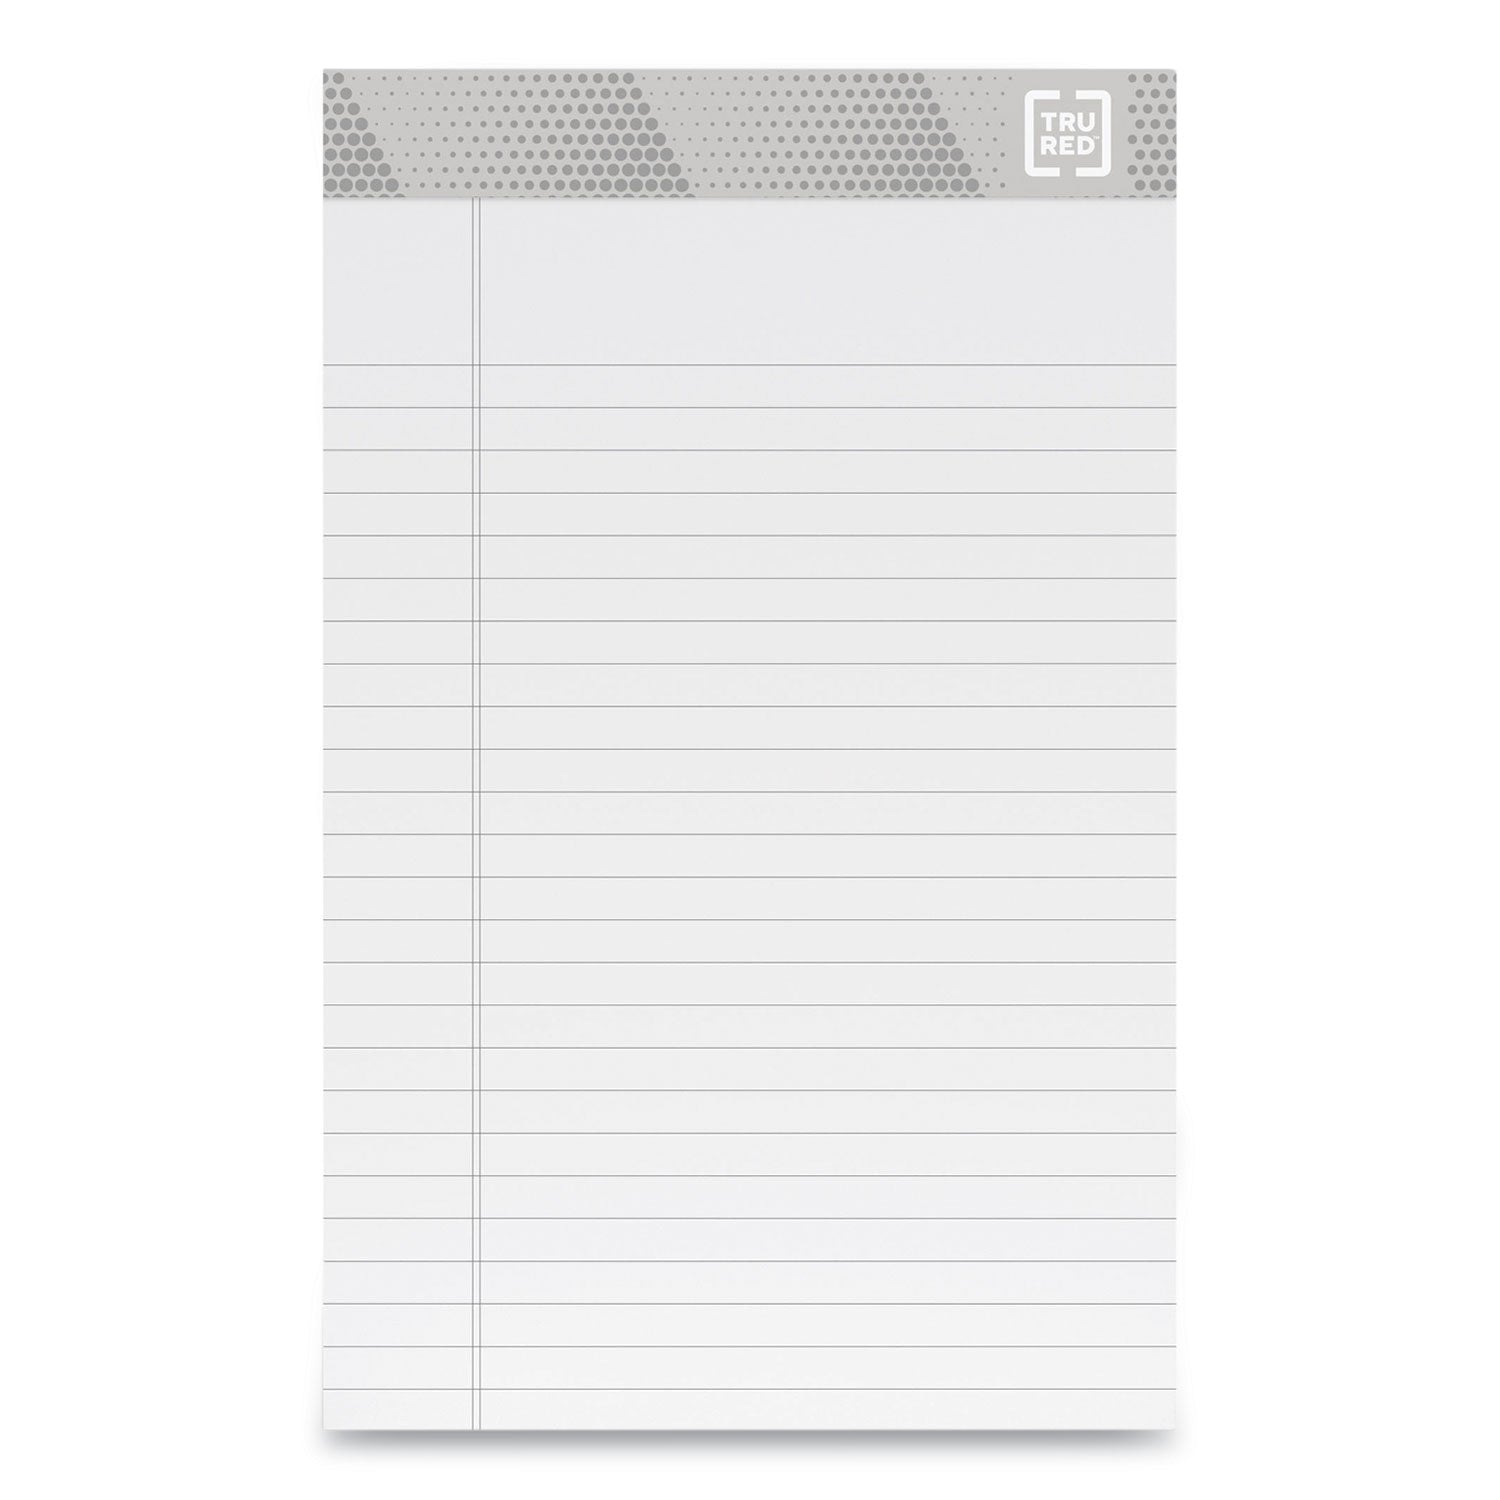 notepads-narrow-rule-50-white-5-x-8-sheets-12-pack_tud24419917 - 2